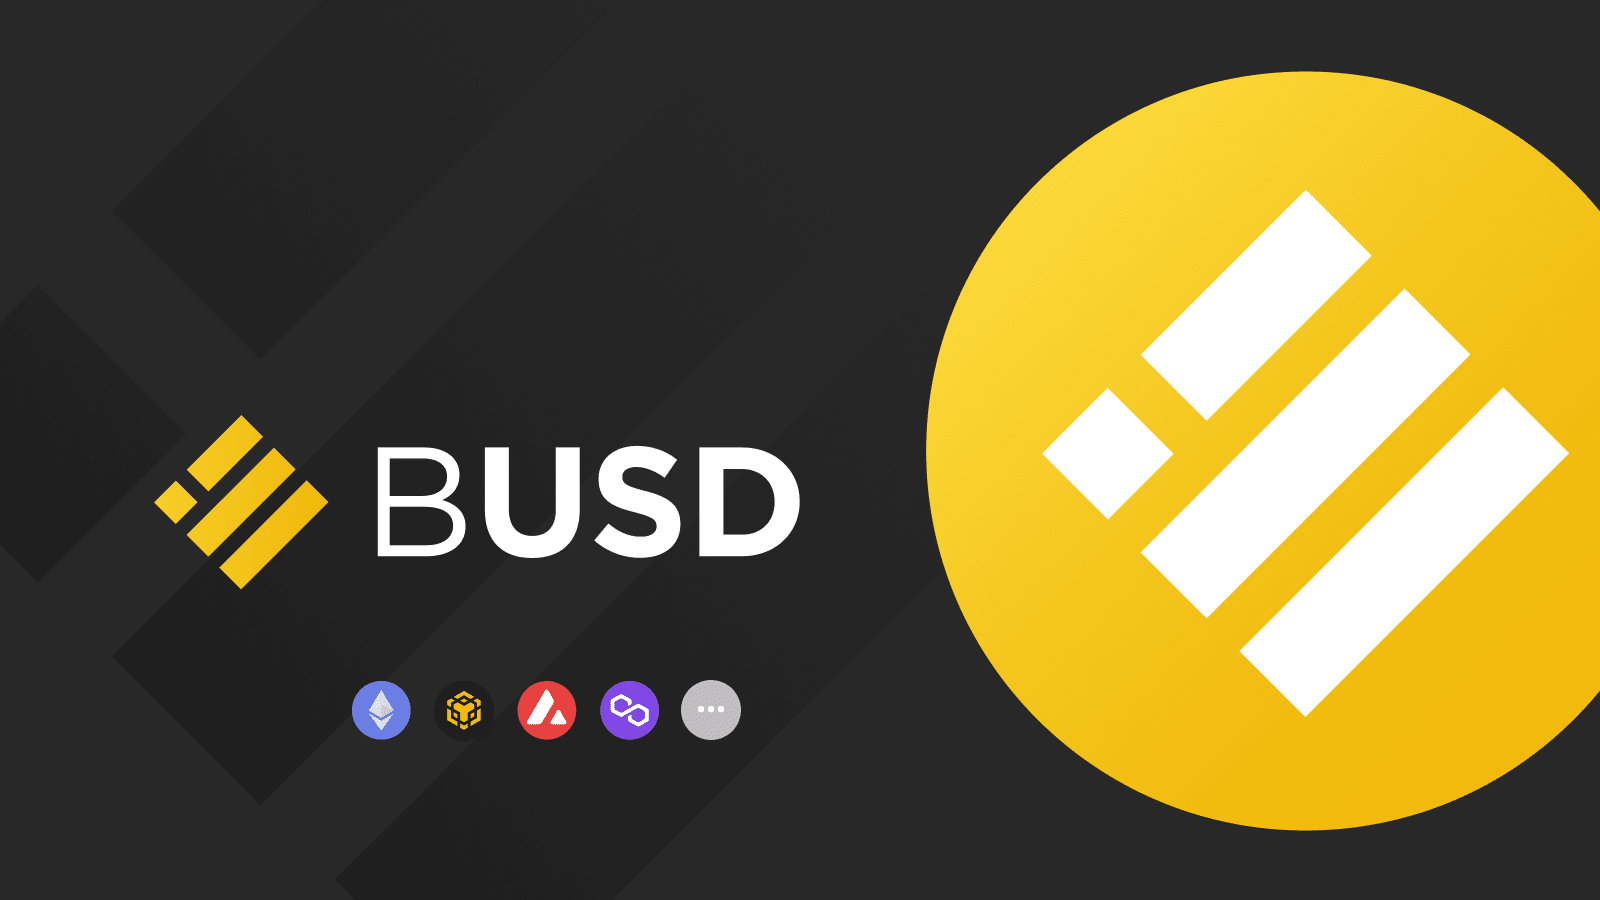 BUSD, Binance's stablecoin, is now available on Polygon and Avalanche